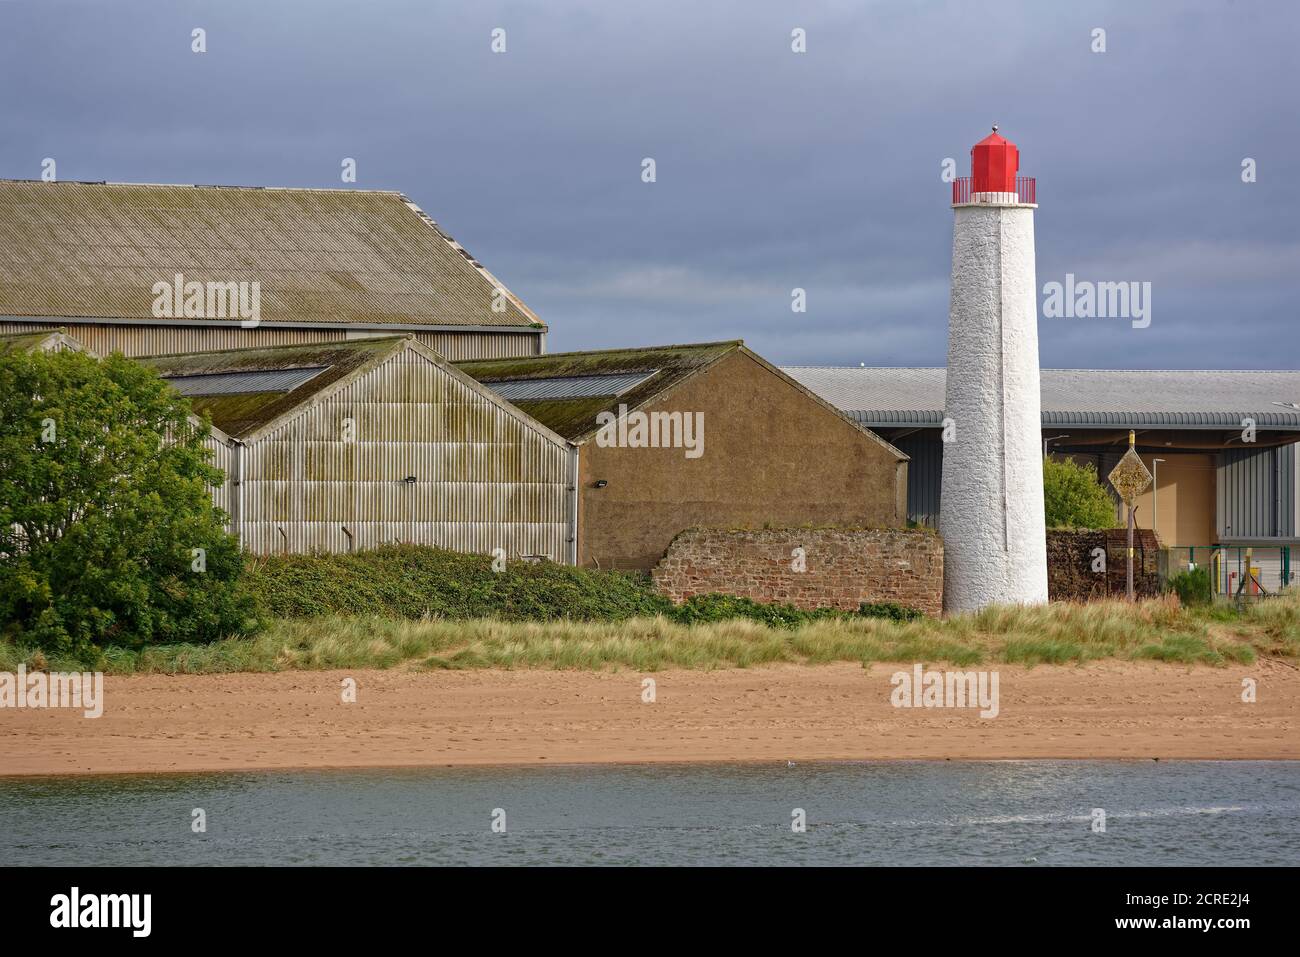 The Old Montrose Rear Lighthouse next to the Beach and beside some Old Warehouses with Galvanised Sides and Roofs, and an Old stone wall. Stock Photo